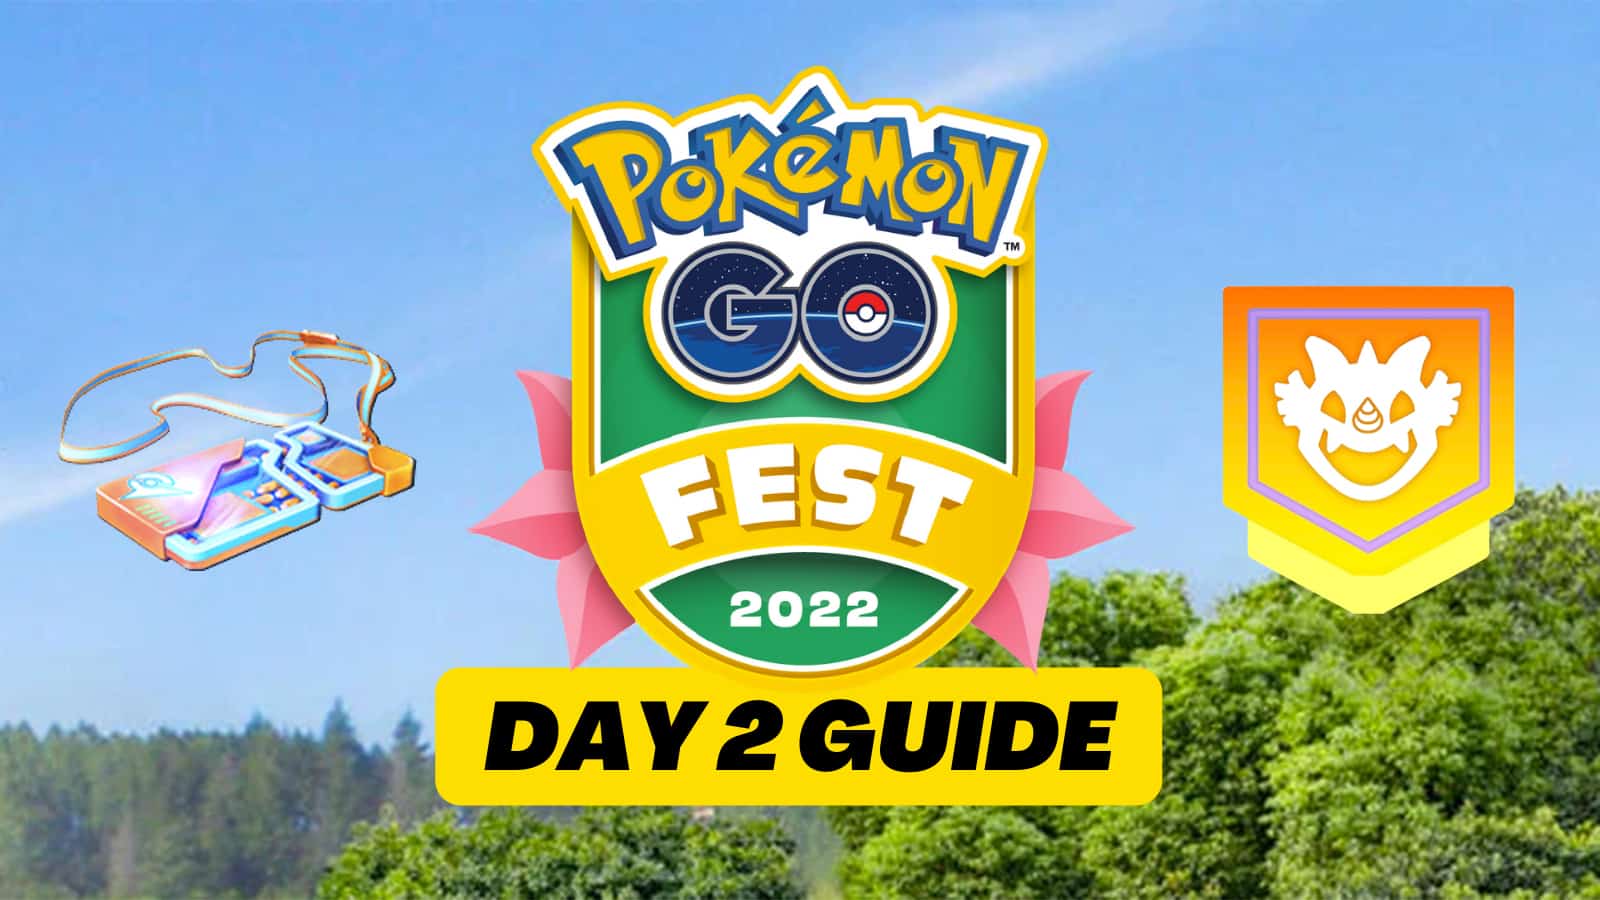 POKEMON GO FEST 2022 DAY 2! Day 1 Shiny Catching/First Ever Ultra